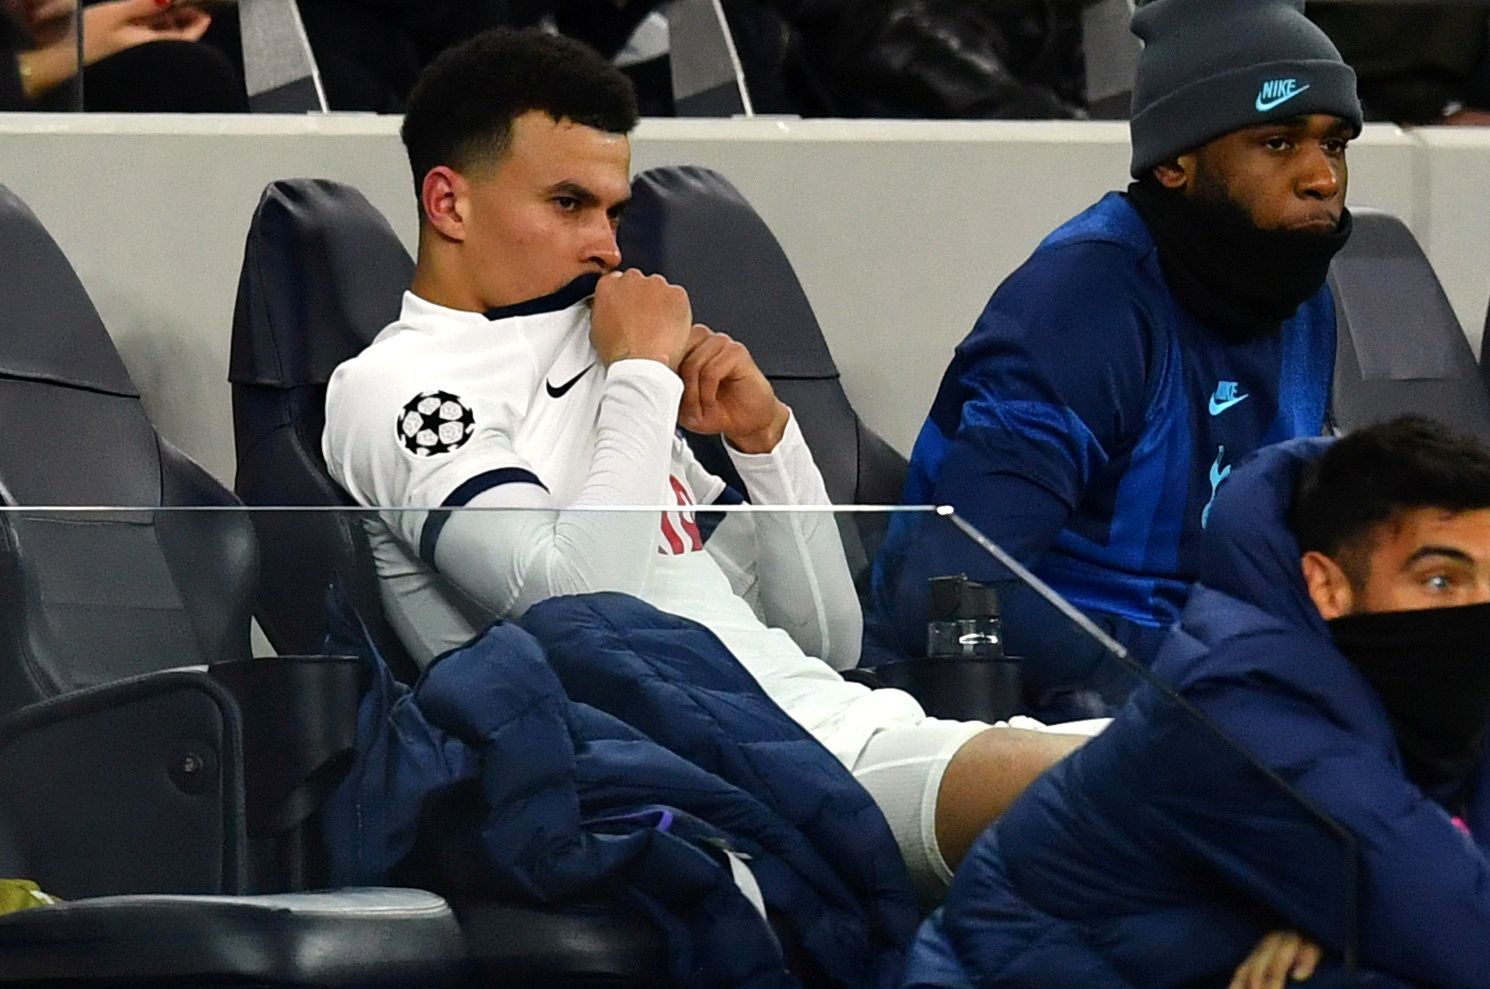 Soccer Football - Champions League - Round of 16 First Leg - Tottenham Hotspur v RB Leipzig - Tottenham Hotspur Stadium, London, Britain - February 19, 2020  Tottenham Hotspur's Dele Alli looks dejected on the bench after he comes off as a substitute  REUTERS/Dylan Martinez